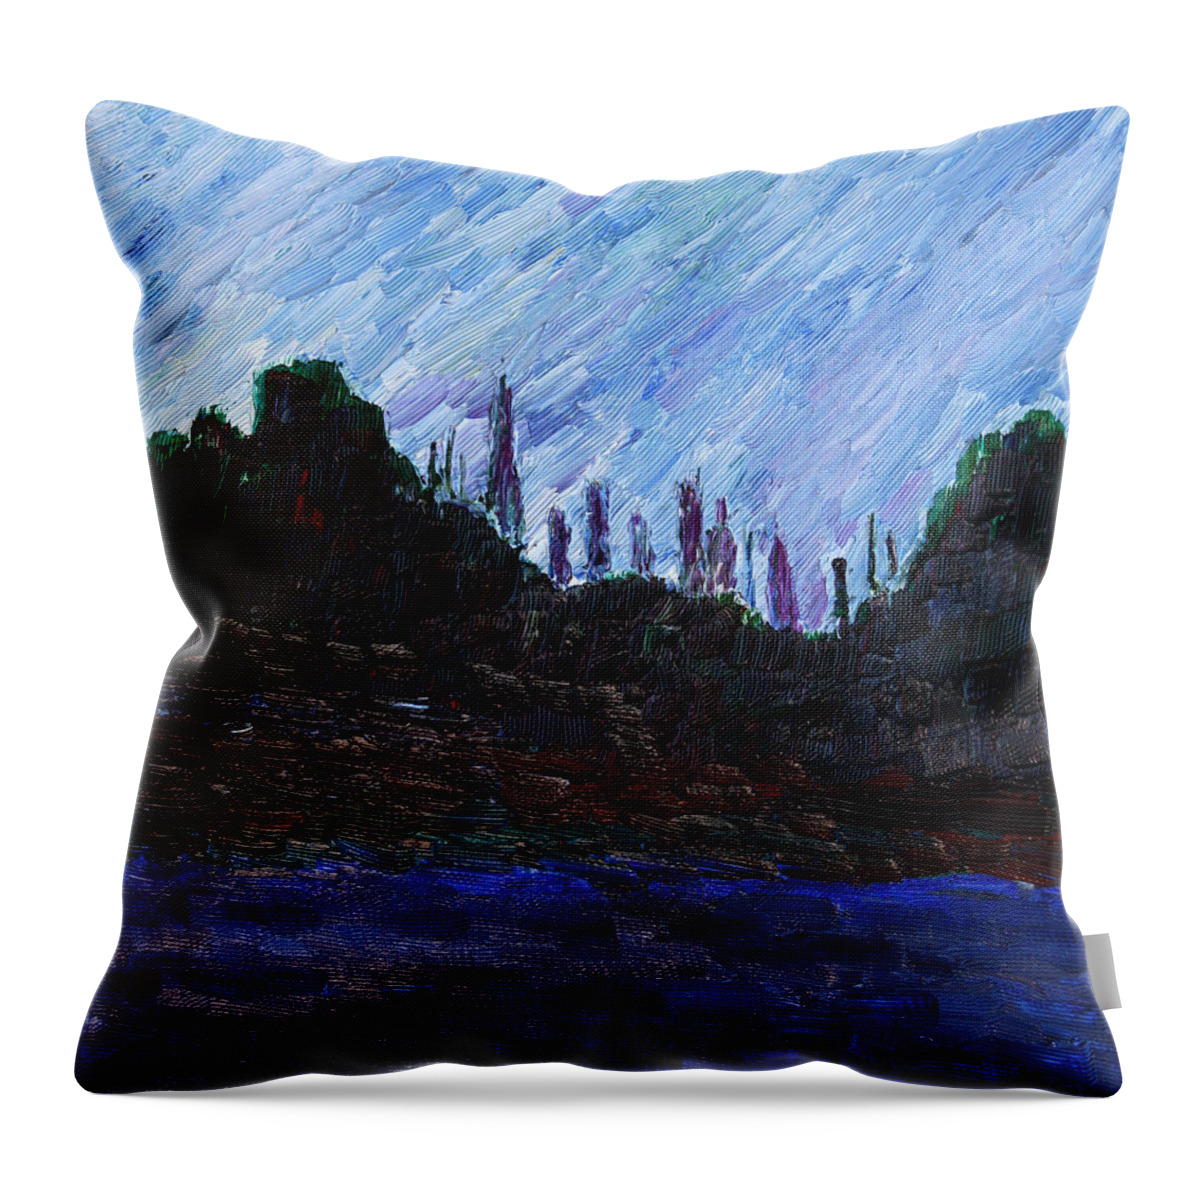 New York Throw Pillow featuring the painting A City That Never Sleeps by Vadim Levin